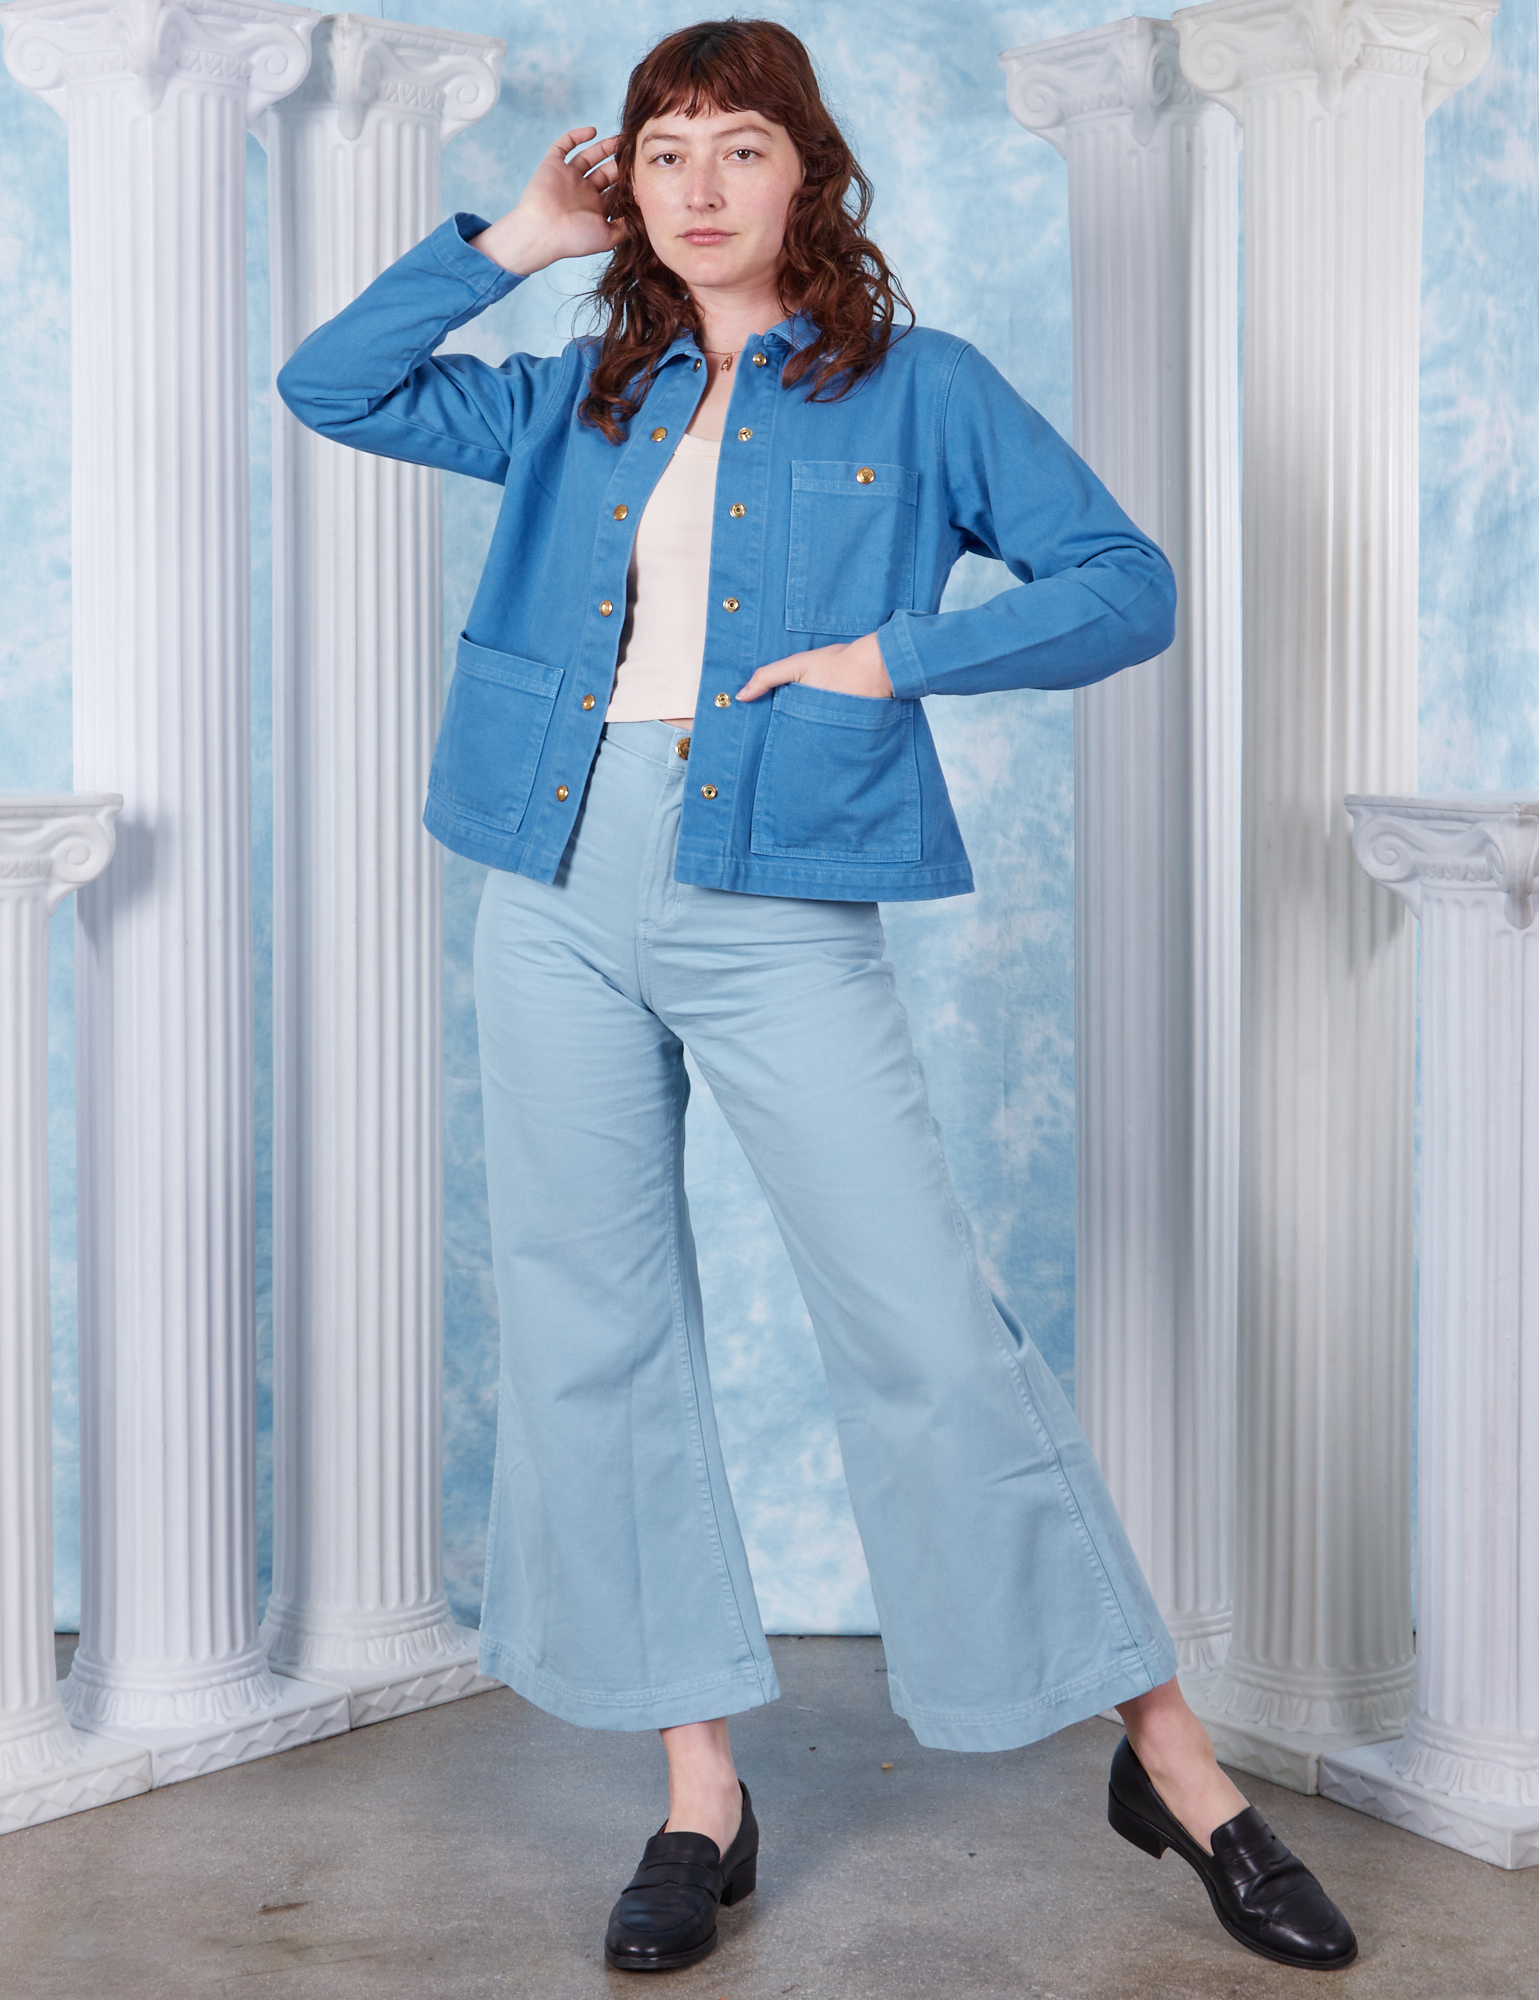 Neoclassical Work Jacket in Blue Venus on Alex wearing vintage off white Tank Top and baby blue Bell Bottoms